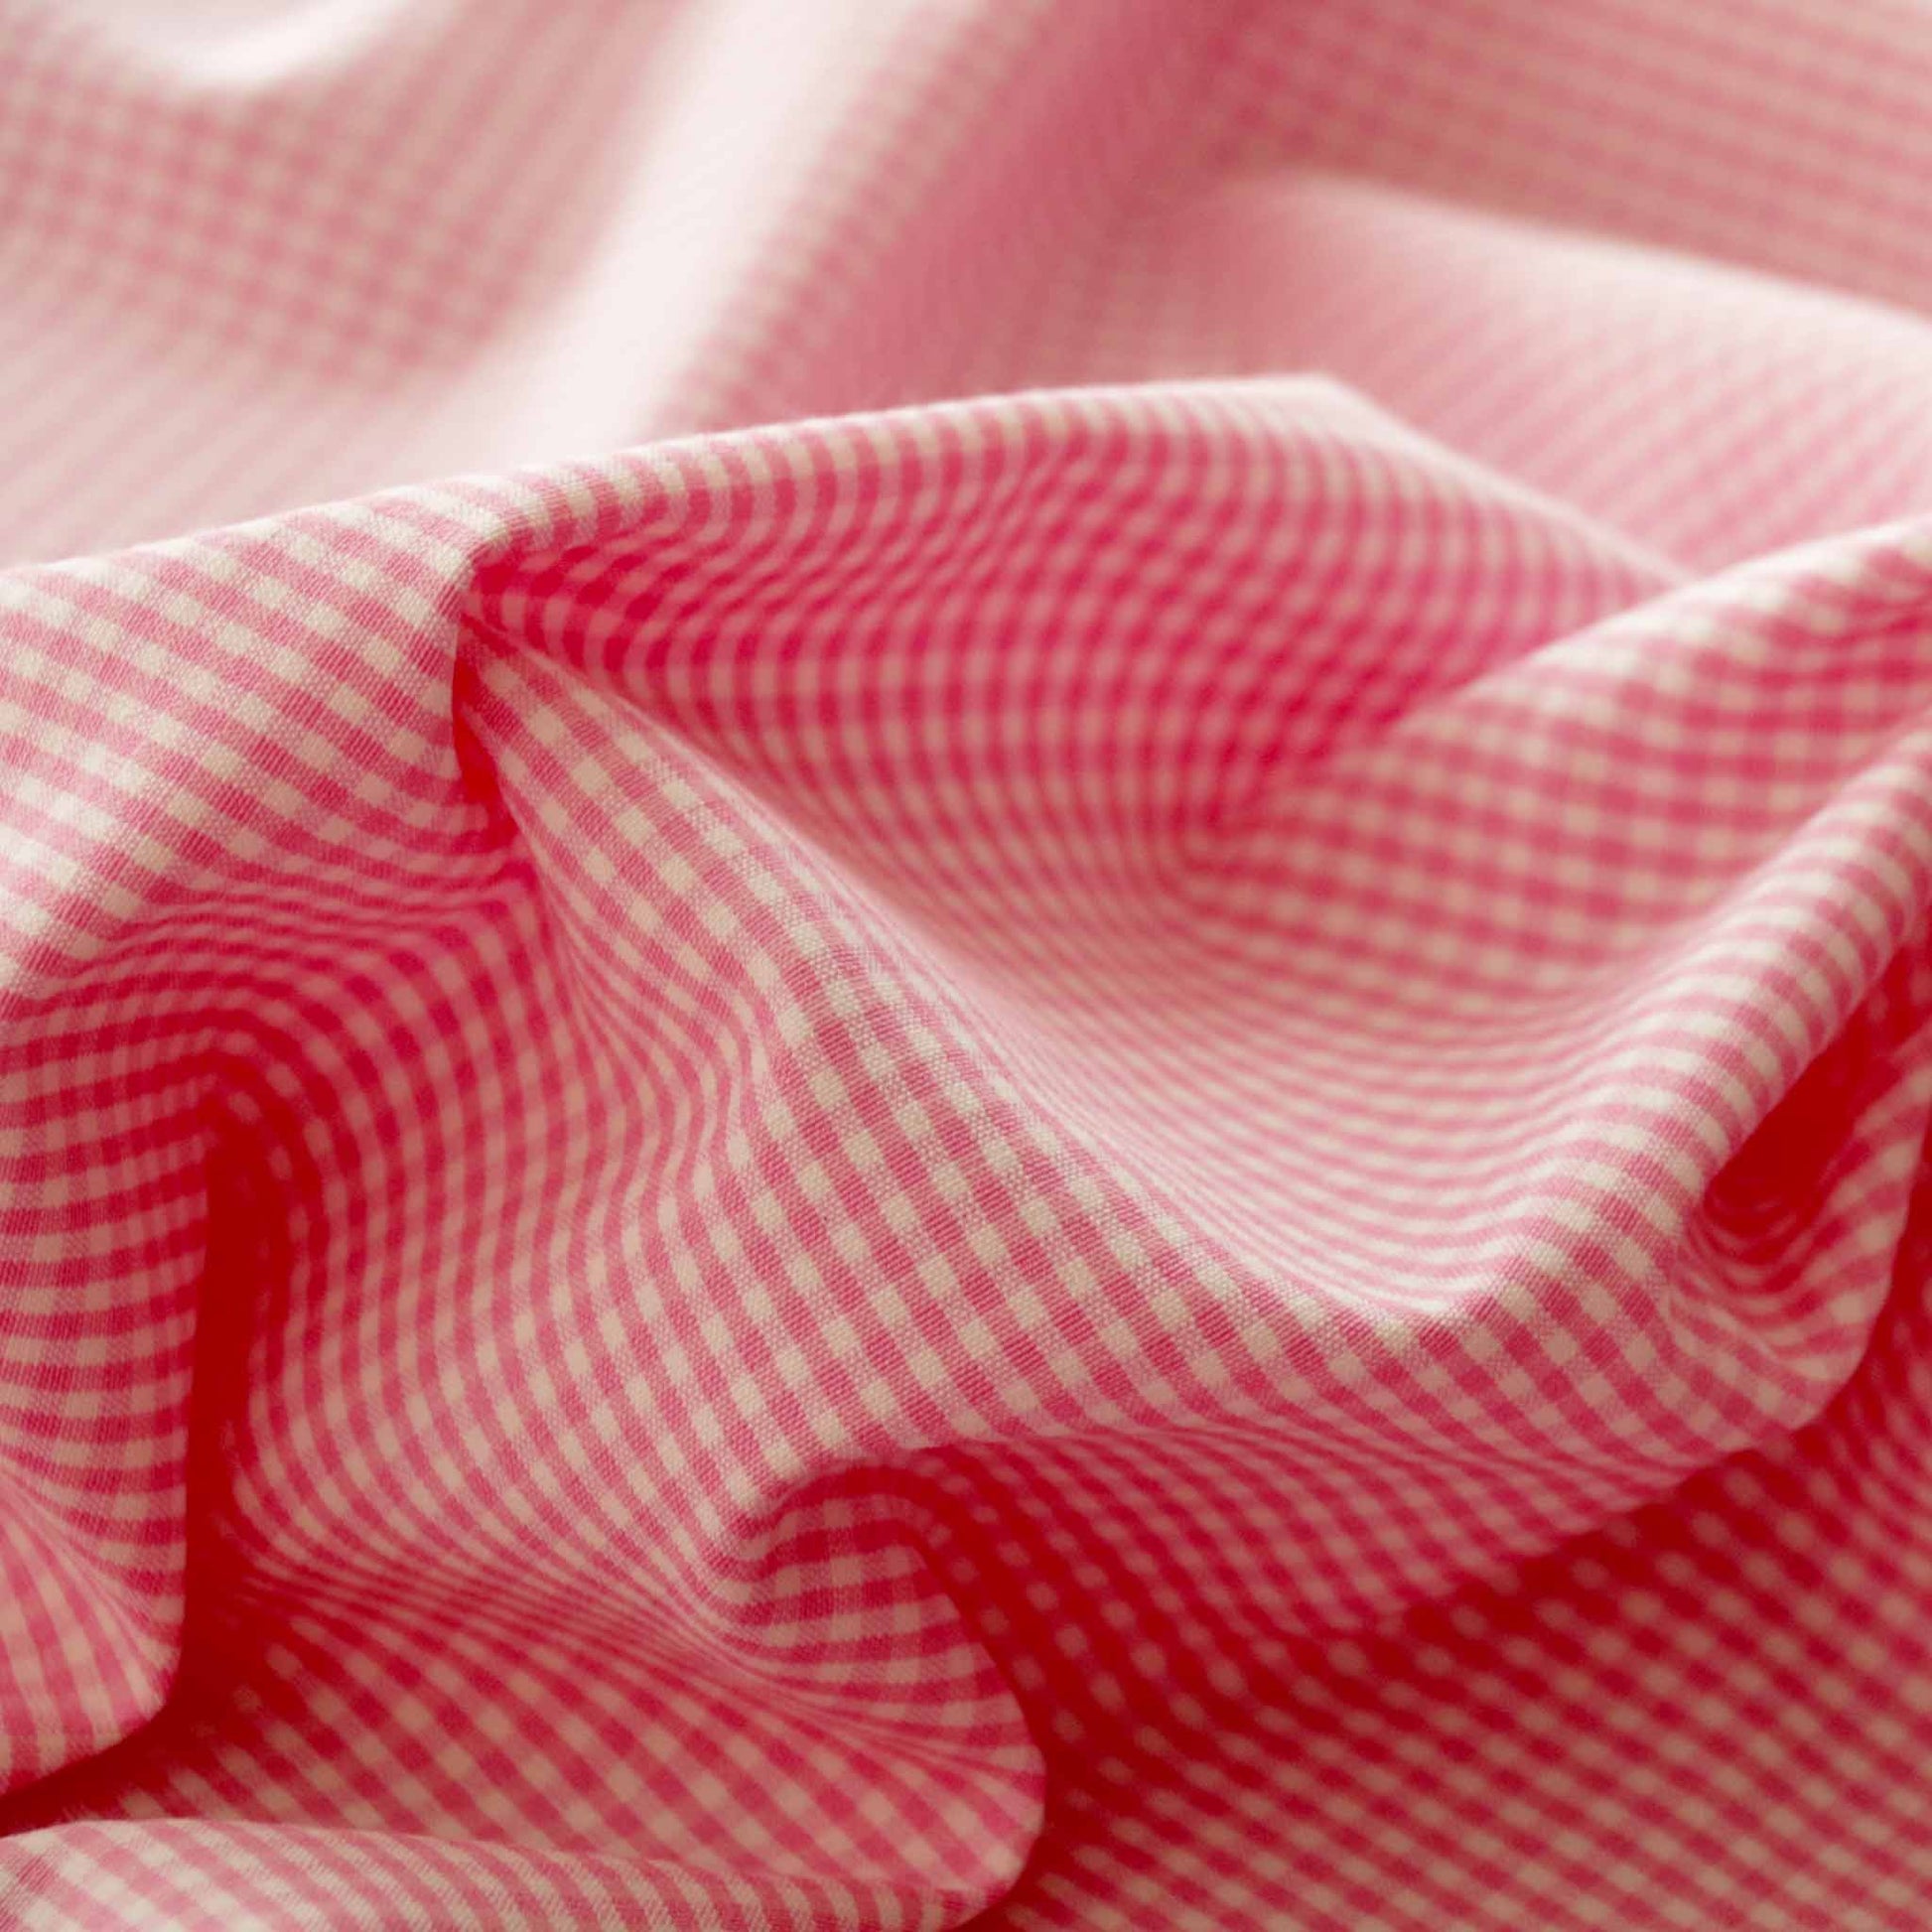 bengaline gingham check dressmaking suiting fabric in white and pink